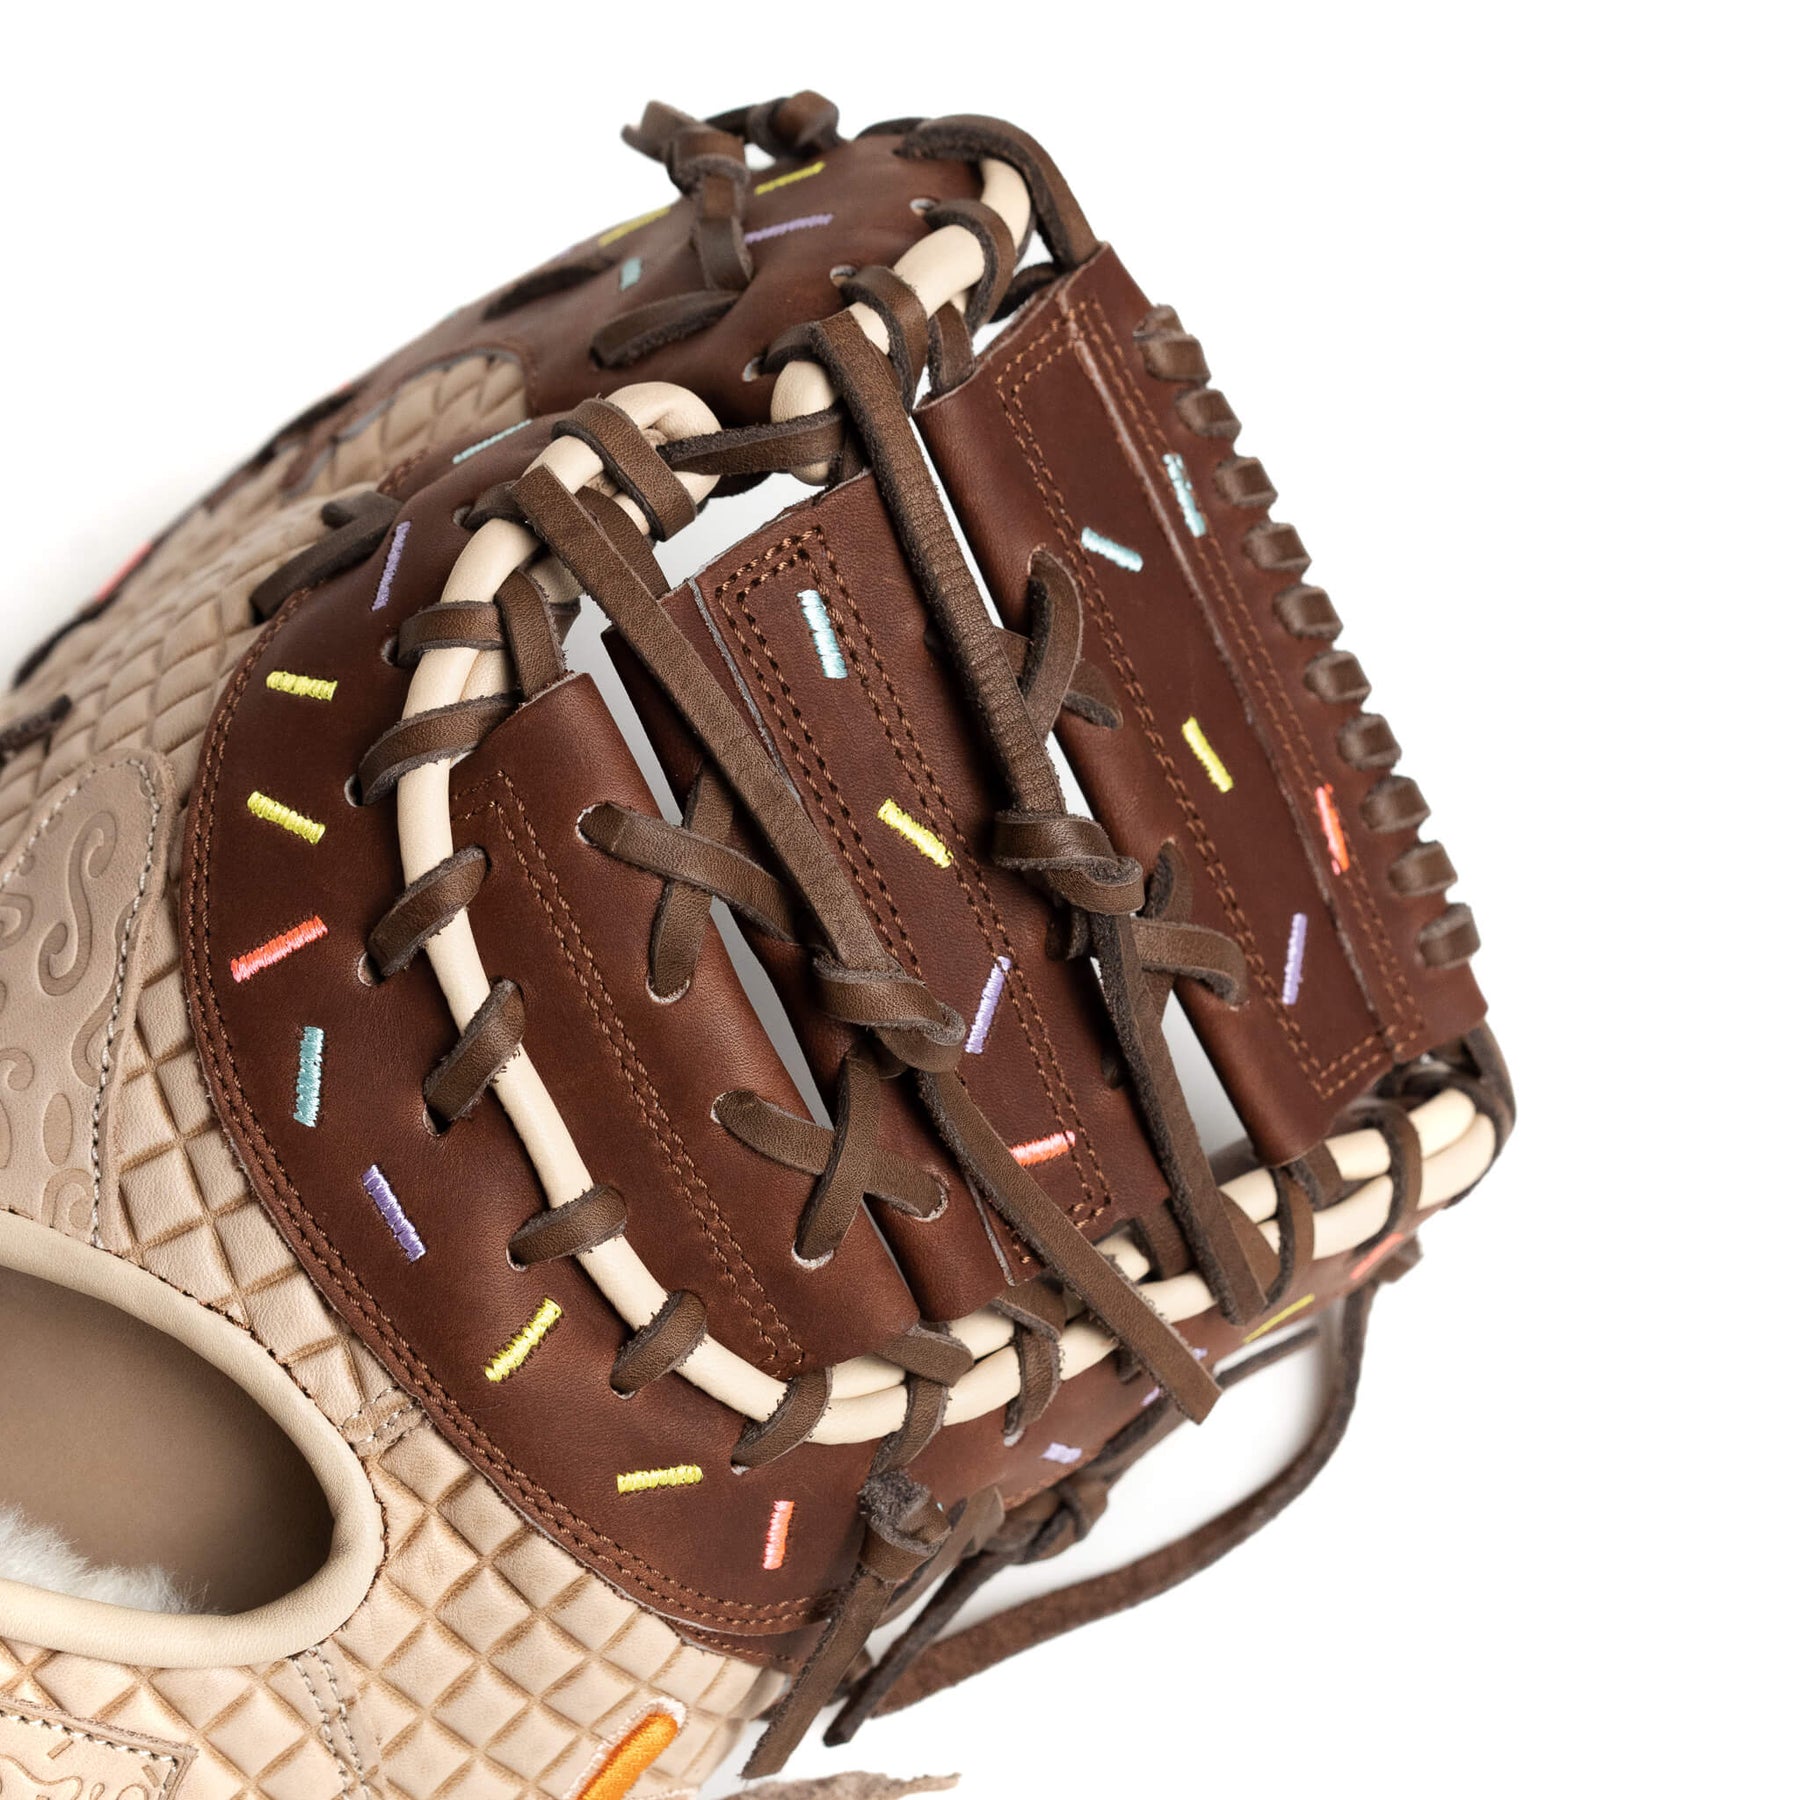 ice cream 1b glove  chocolate – Absolutely Ridiculous innovation for  Athletes